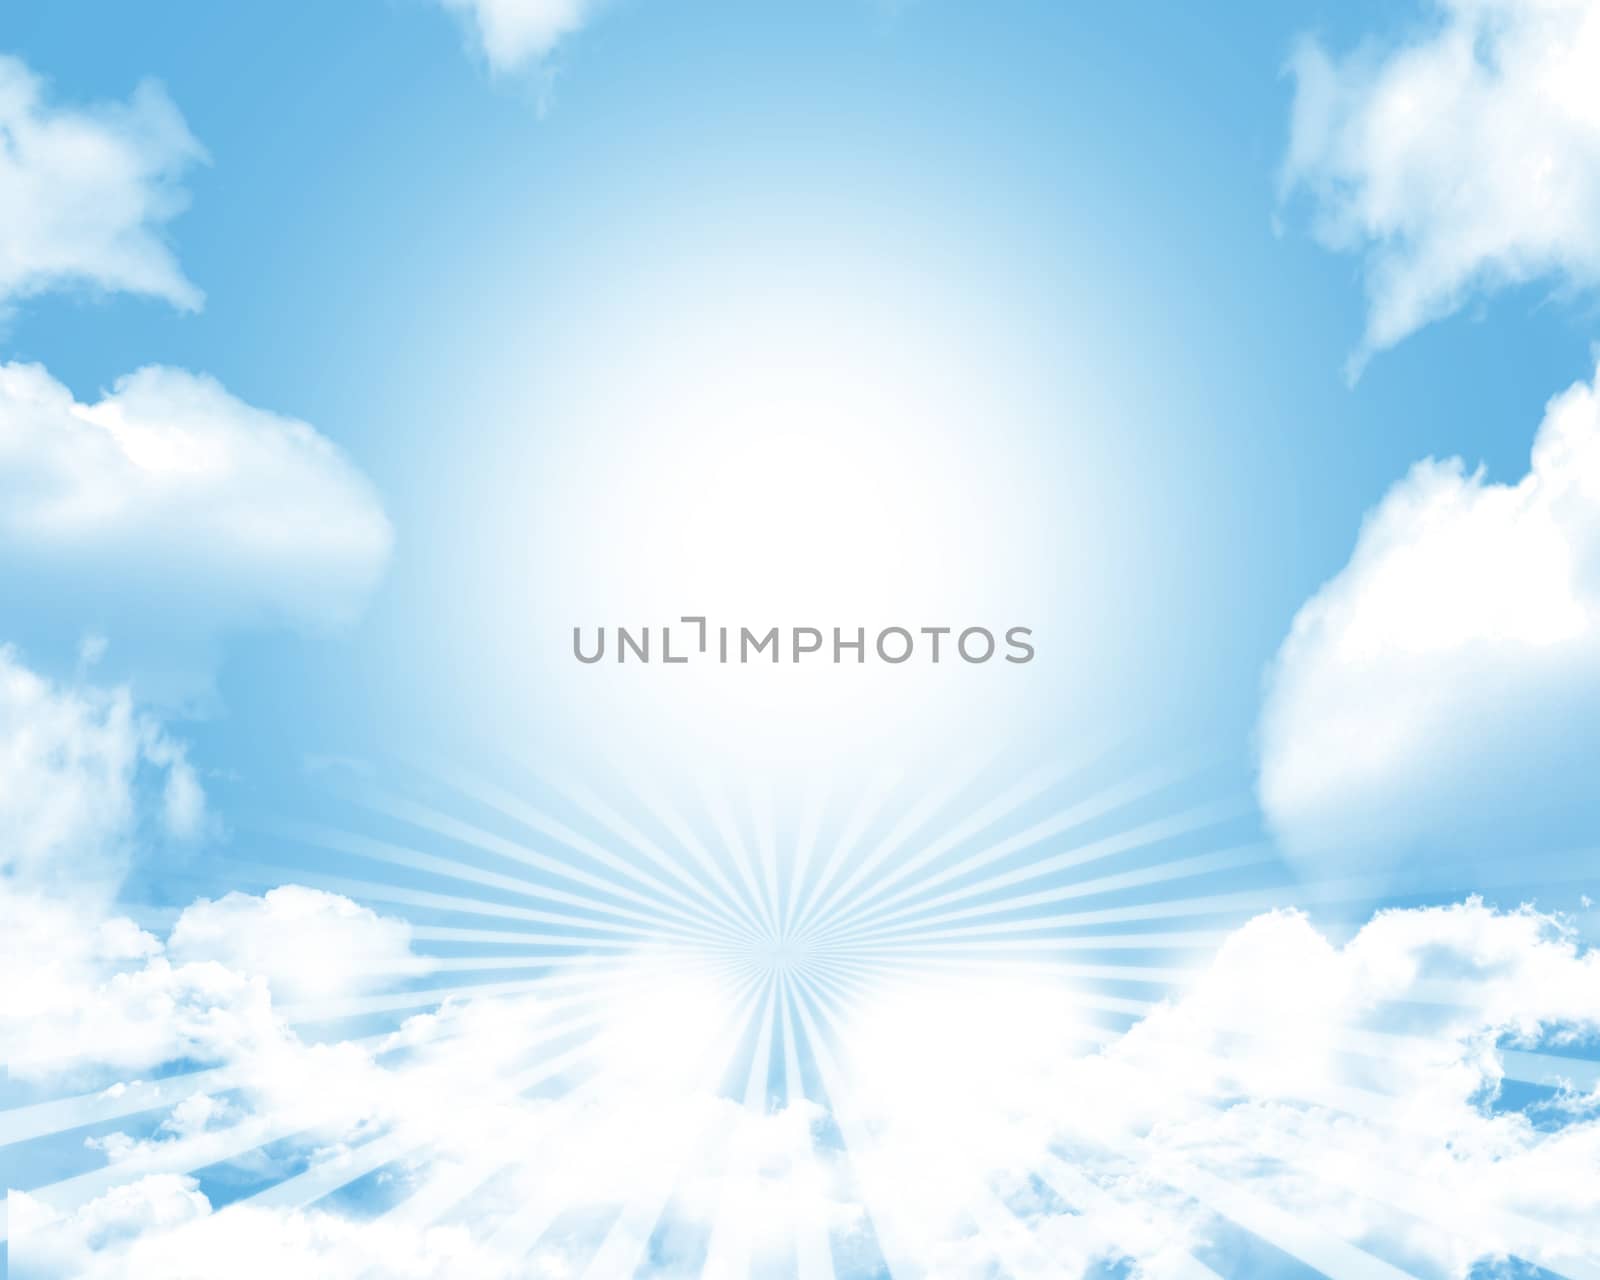 Abstract blue background is sky with clouds and stripes at bottom. Set your object in center